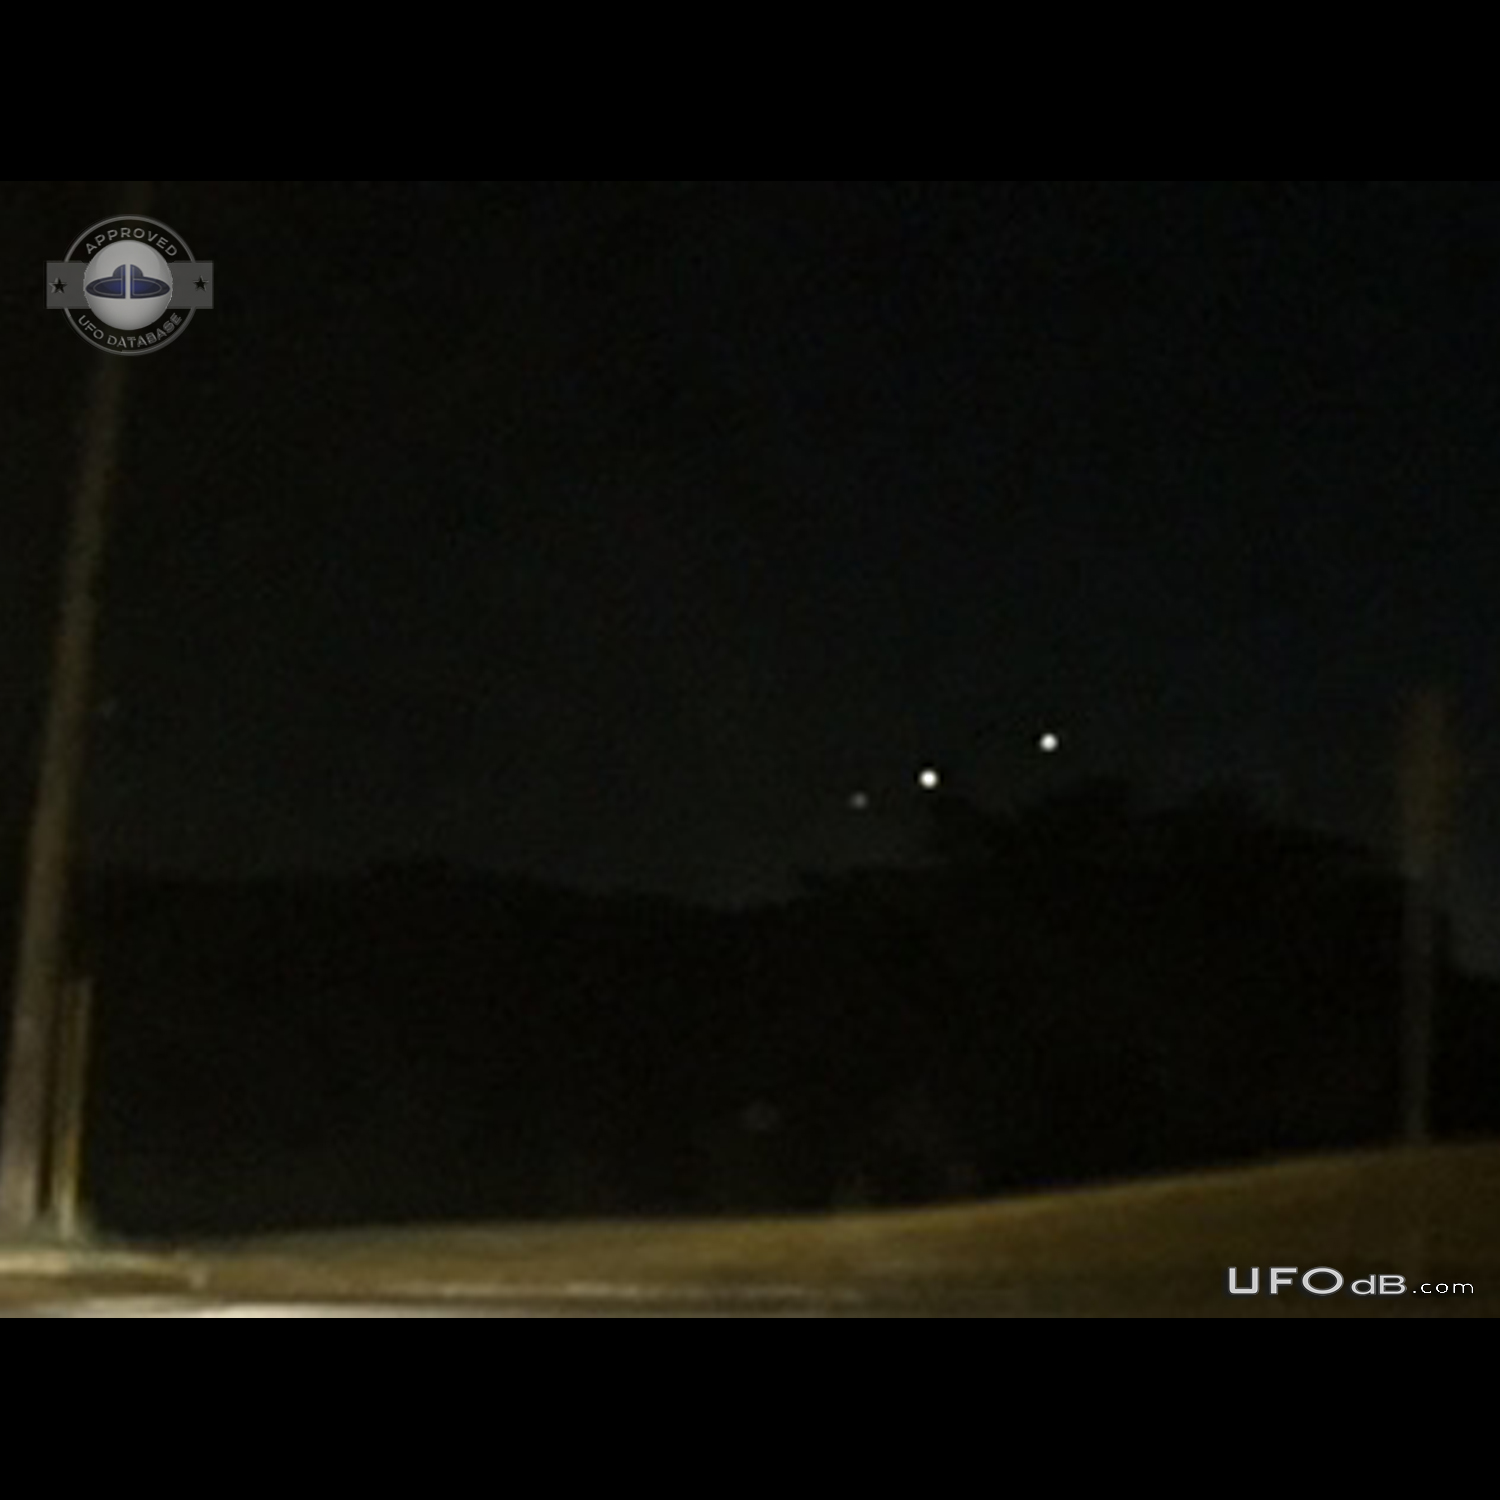 Perfect line of hovering UFOs low to ground - Hazelwood Missouri 2015 UFO Picture #737-4